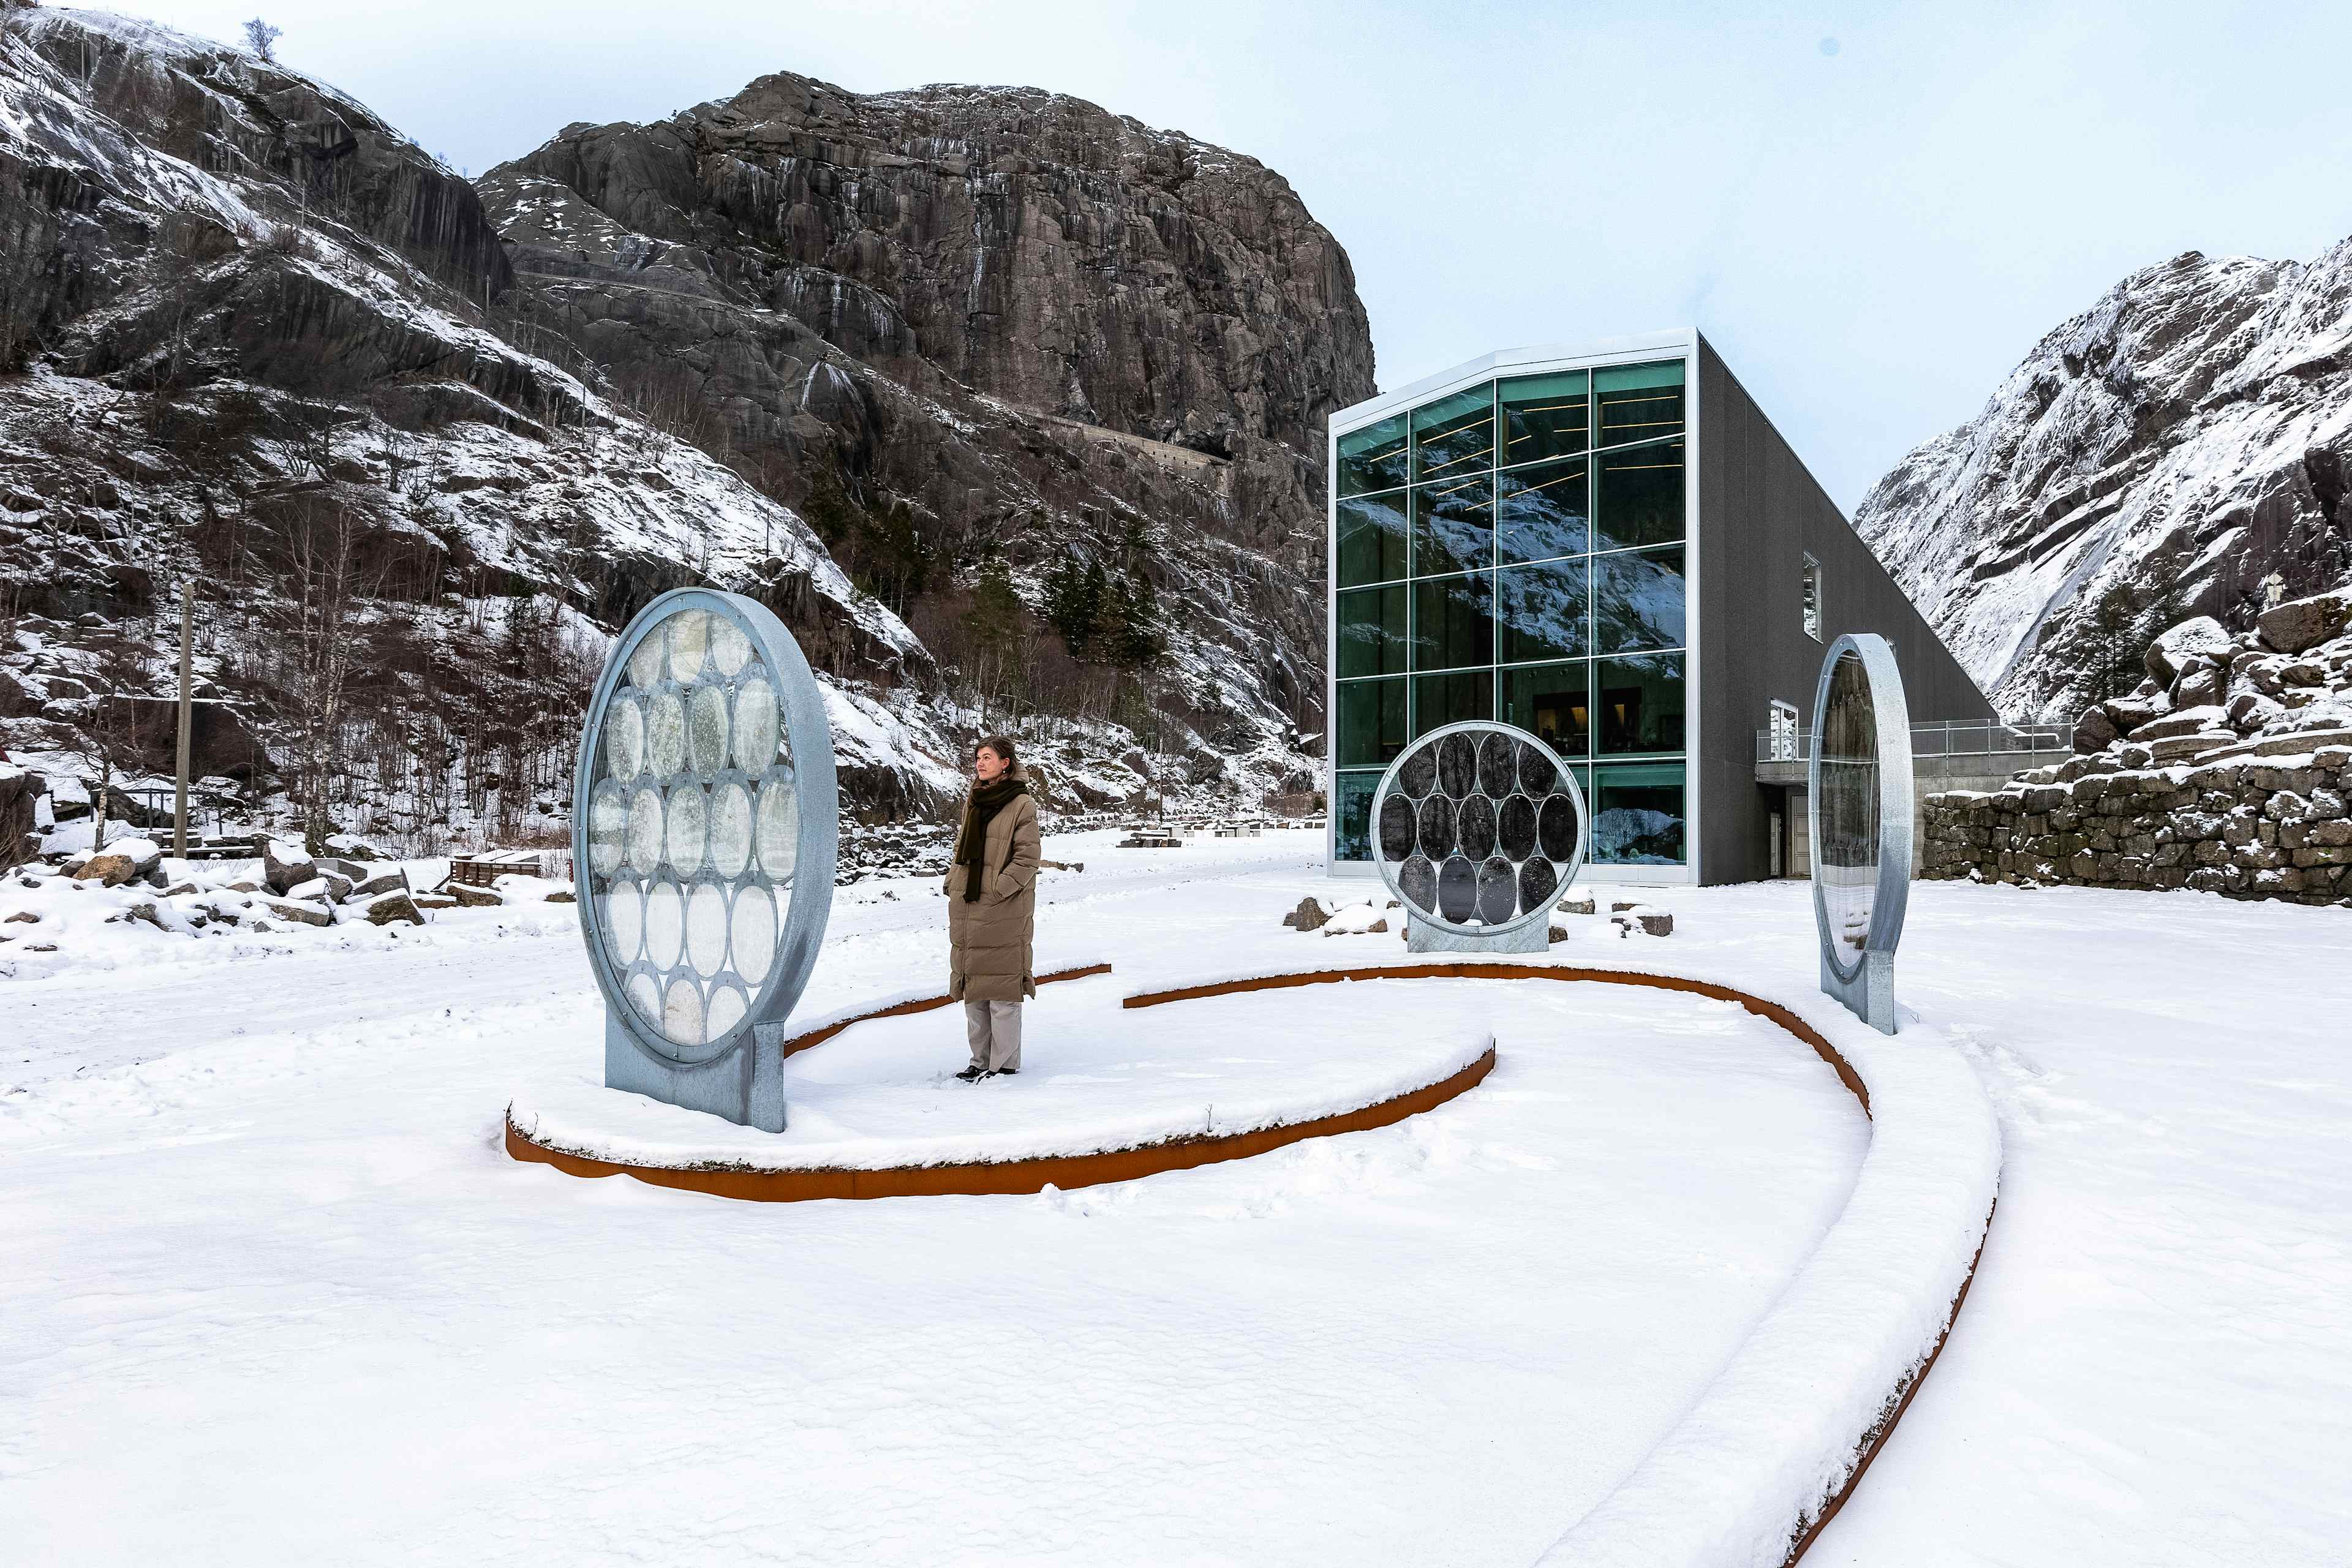 Artwork in front of a museum building - there is snow on the ground. A person is standing watching the artwork.